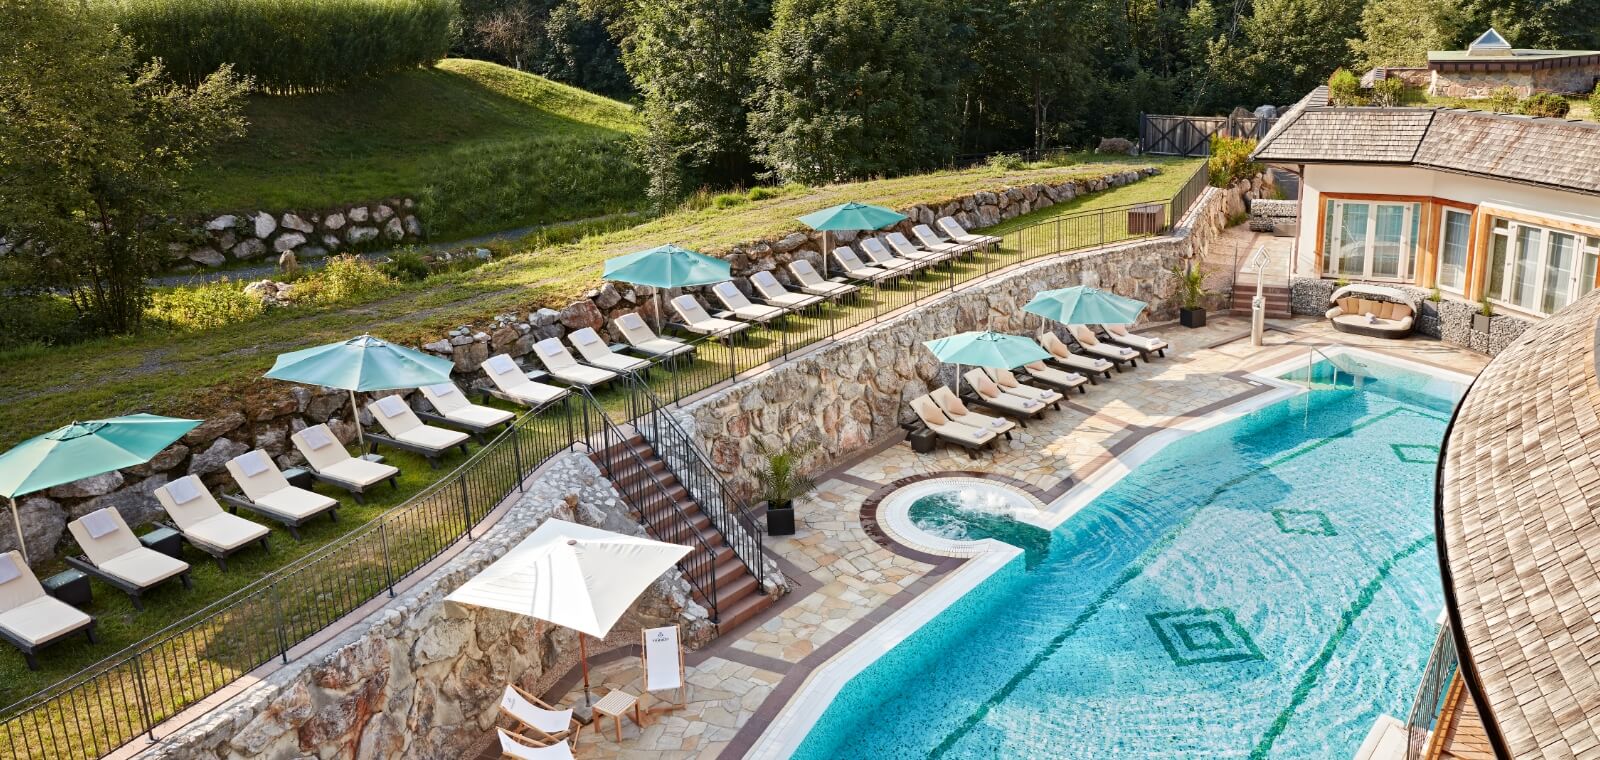 The pool and loungers in the outdoor area of the hotel